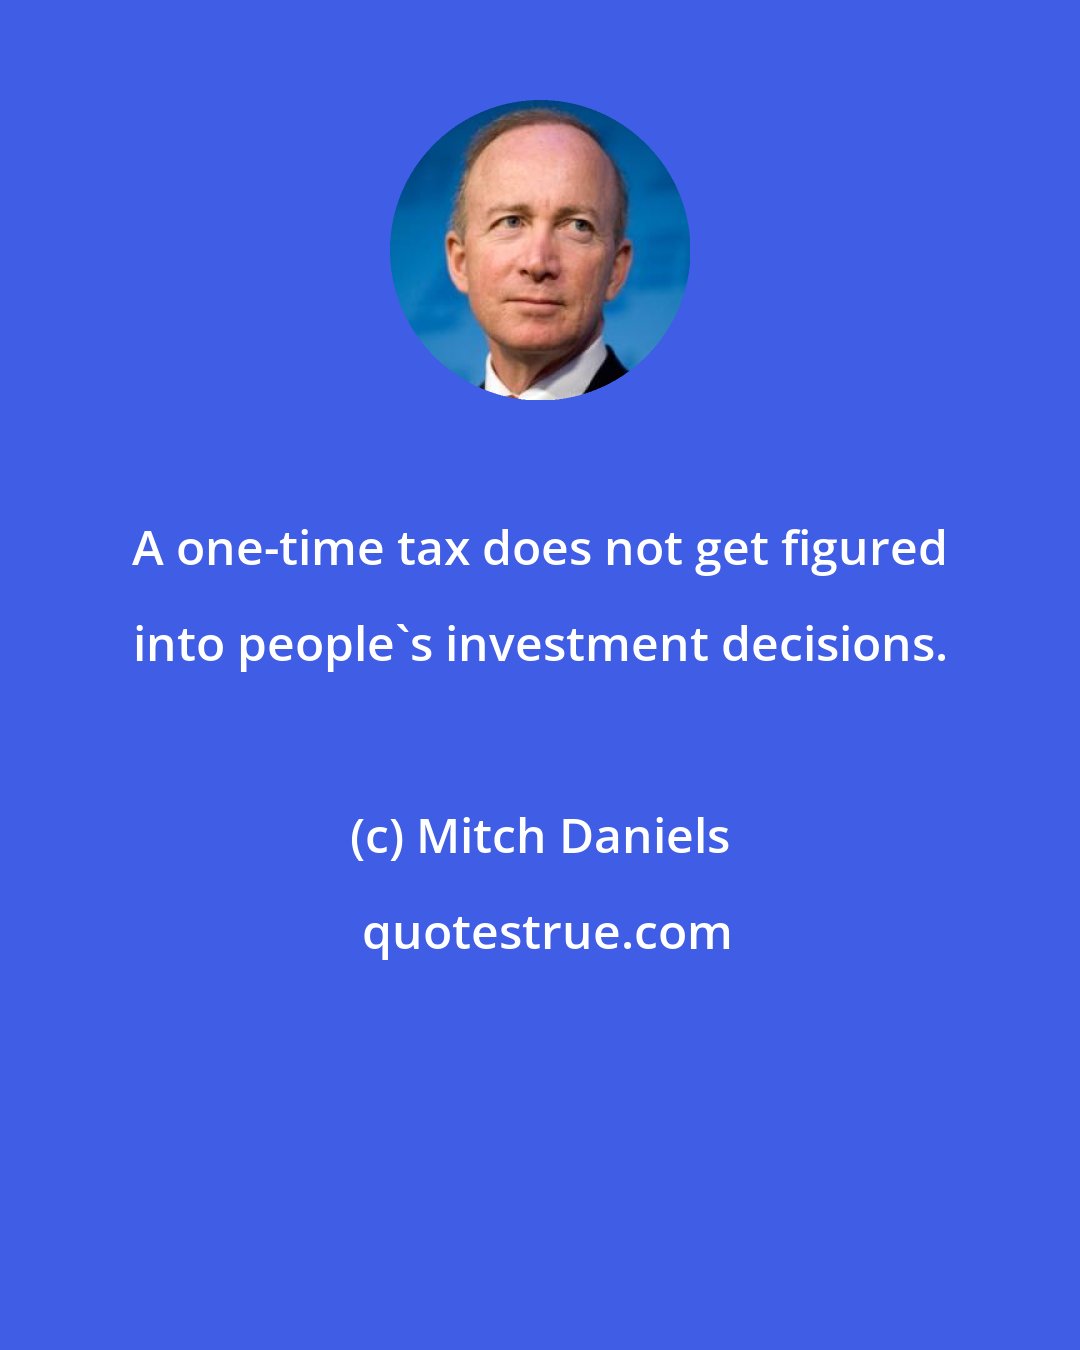 Mitch Daniels: A one-time tax does not get figured into people's investment decisions.